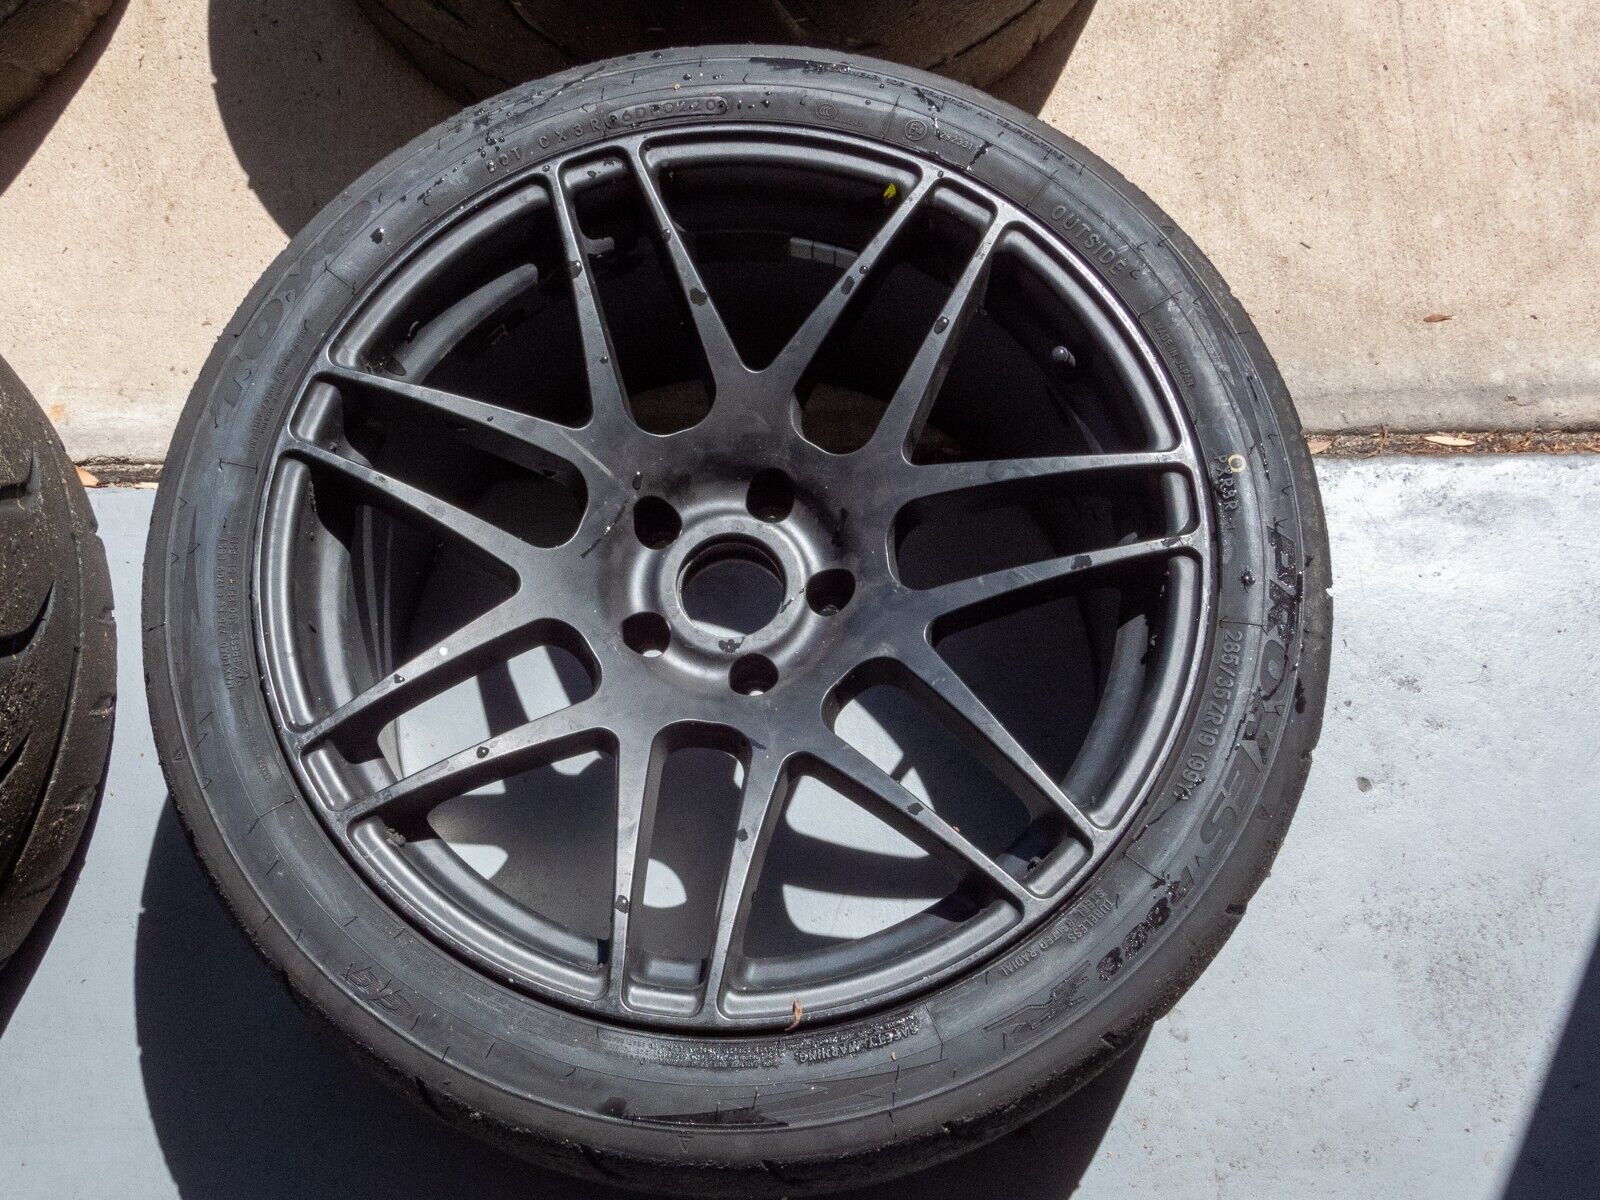 2013 GT-R Forgestar Racing Wheel(s) with Toyo Proxes